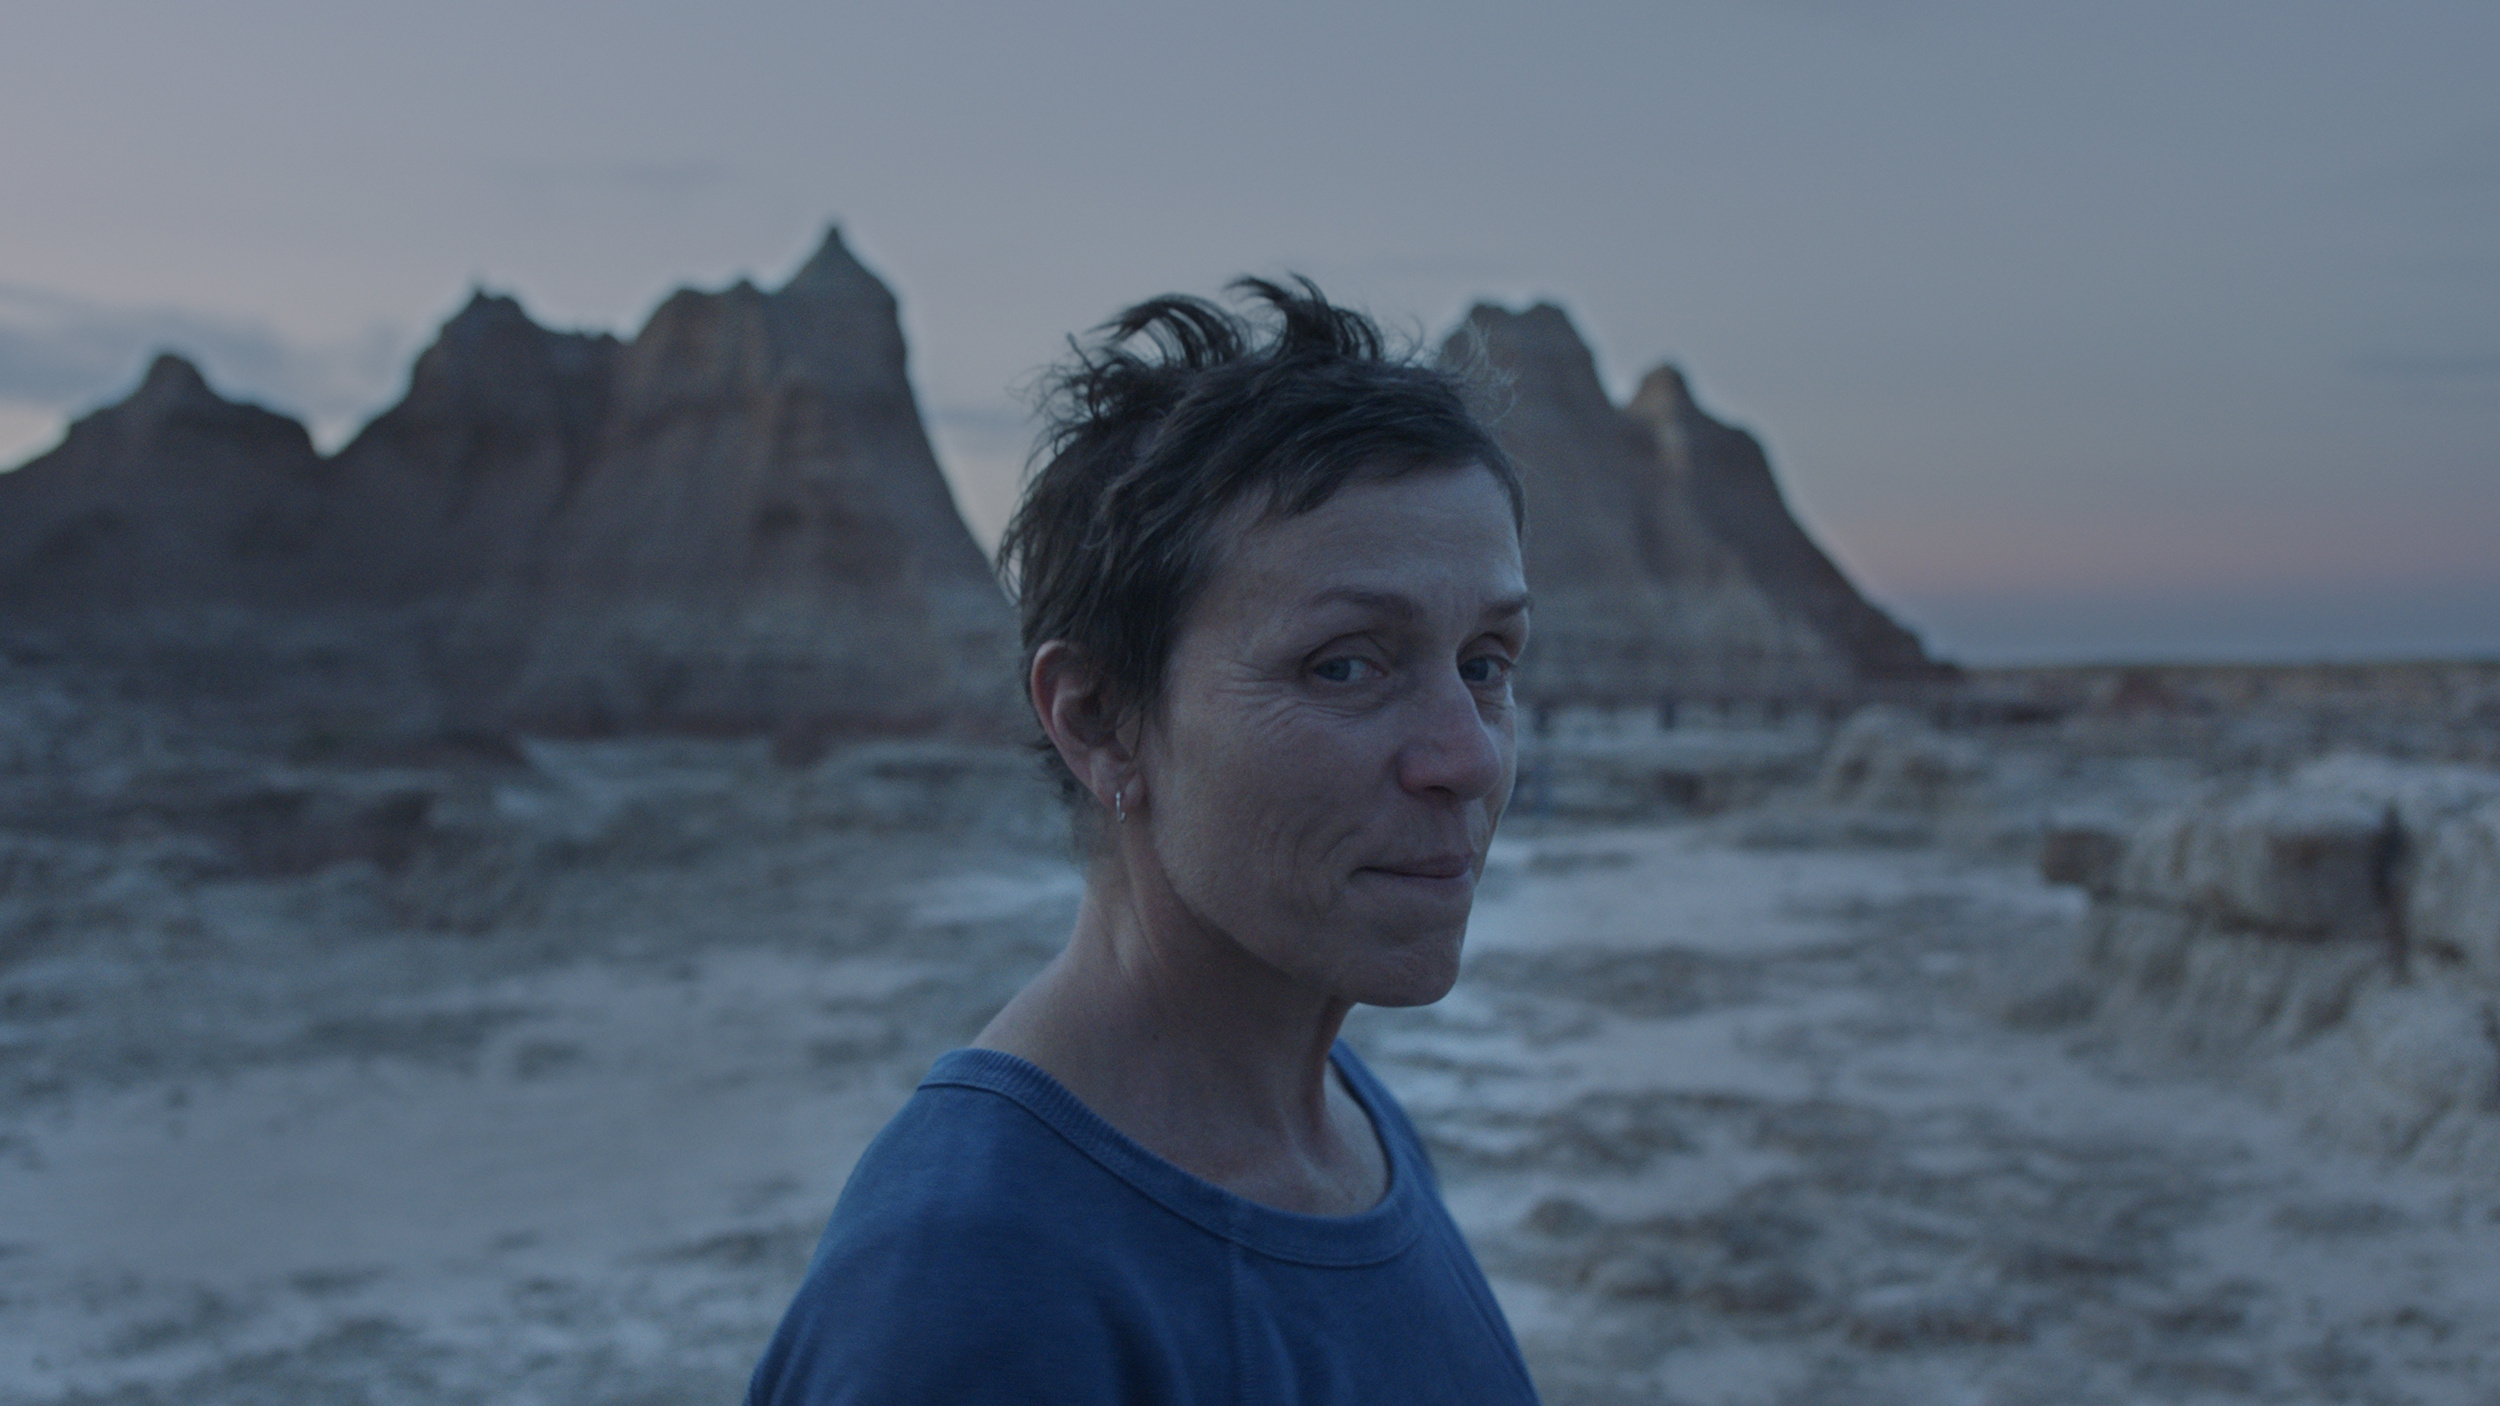 <p>It’s amazing how some stories that might not sound interesting at all can be told in such a beautiful way. Such is the case for <em>Nomadland</em>, one of the few films to have won a female director (Chloé Zhao) an Oscar for directing. This film stars Frances McDormand, and it absolutely shines. </p><p>You may also like: <a href='https://www.yardbarker.com/entertainment/articles/the_most_memorable_hollywood_duos/s1__37259368'>The most memorable Hollywood duos</a></p>